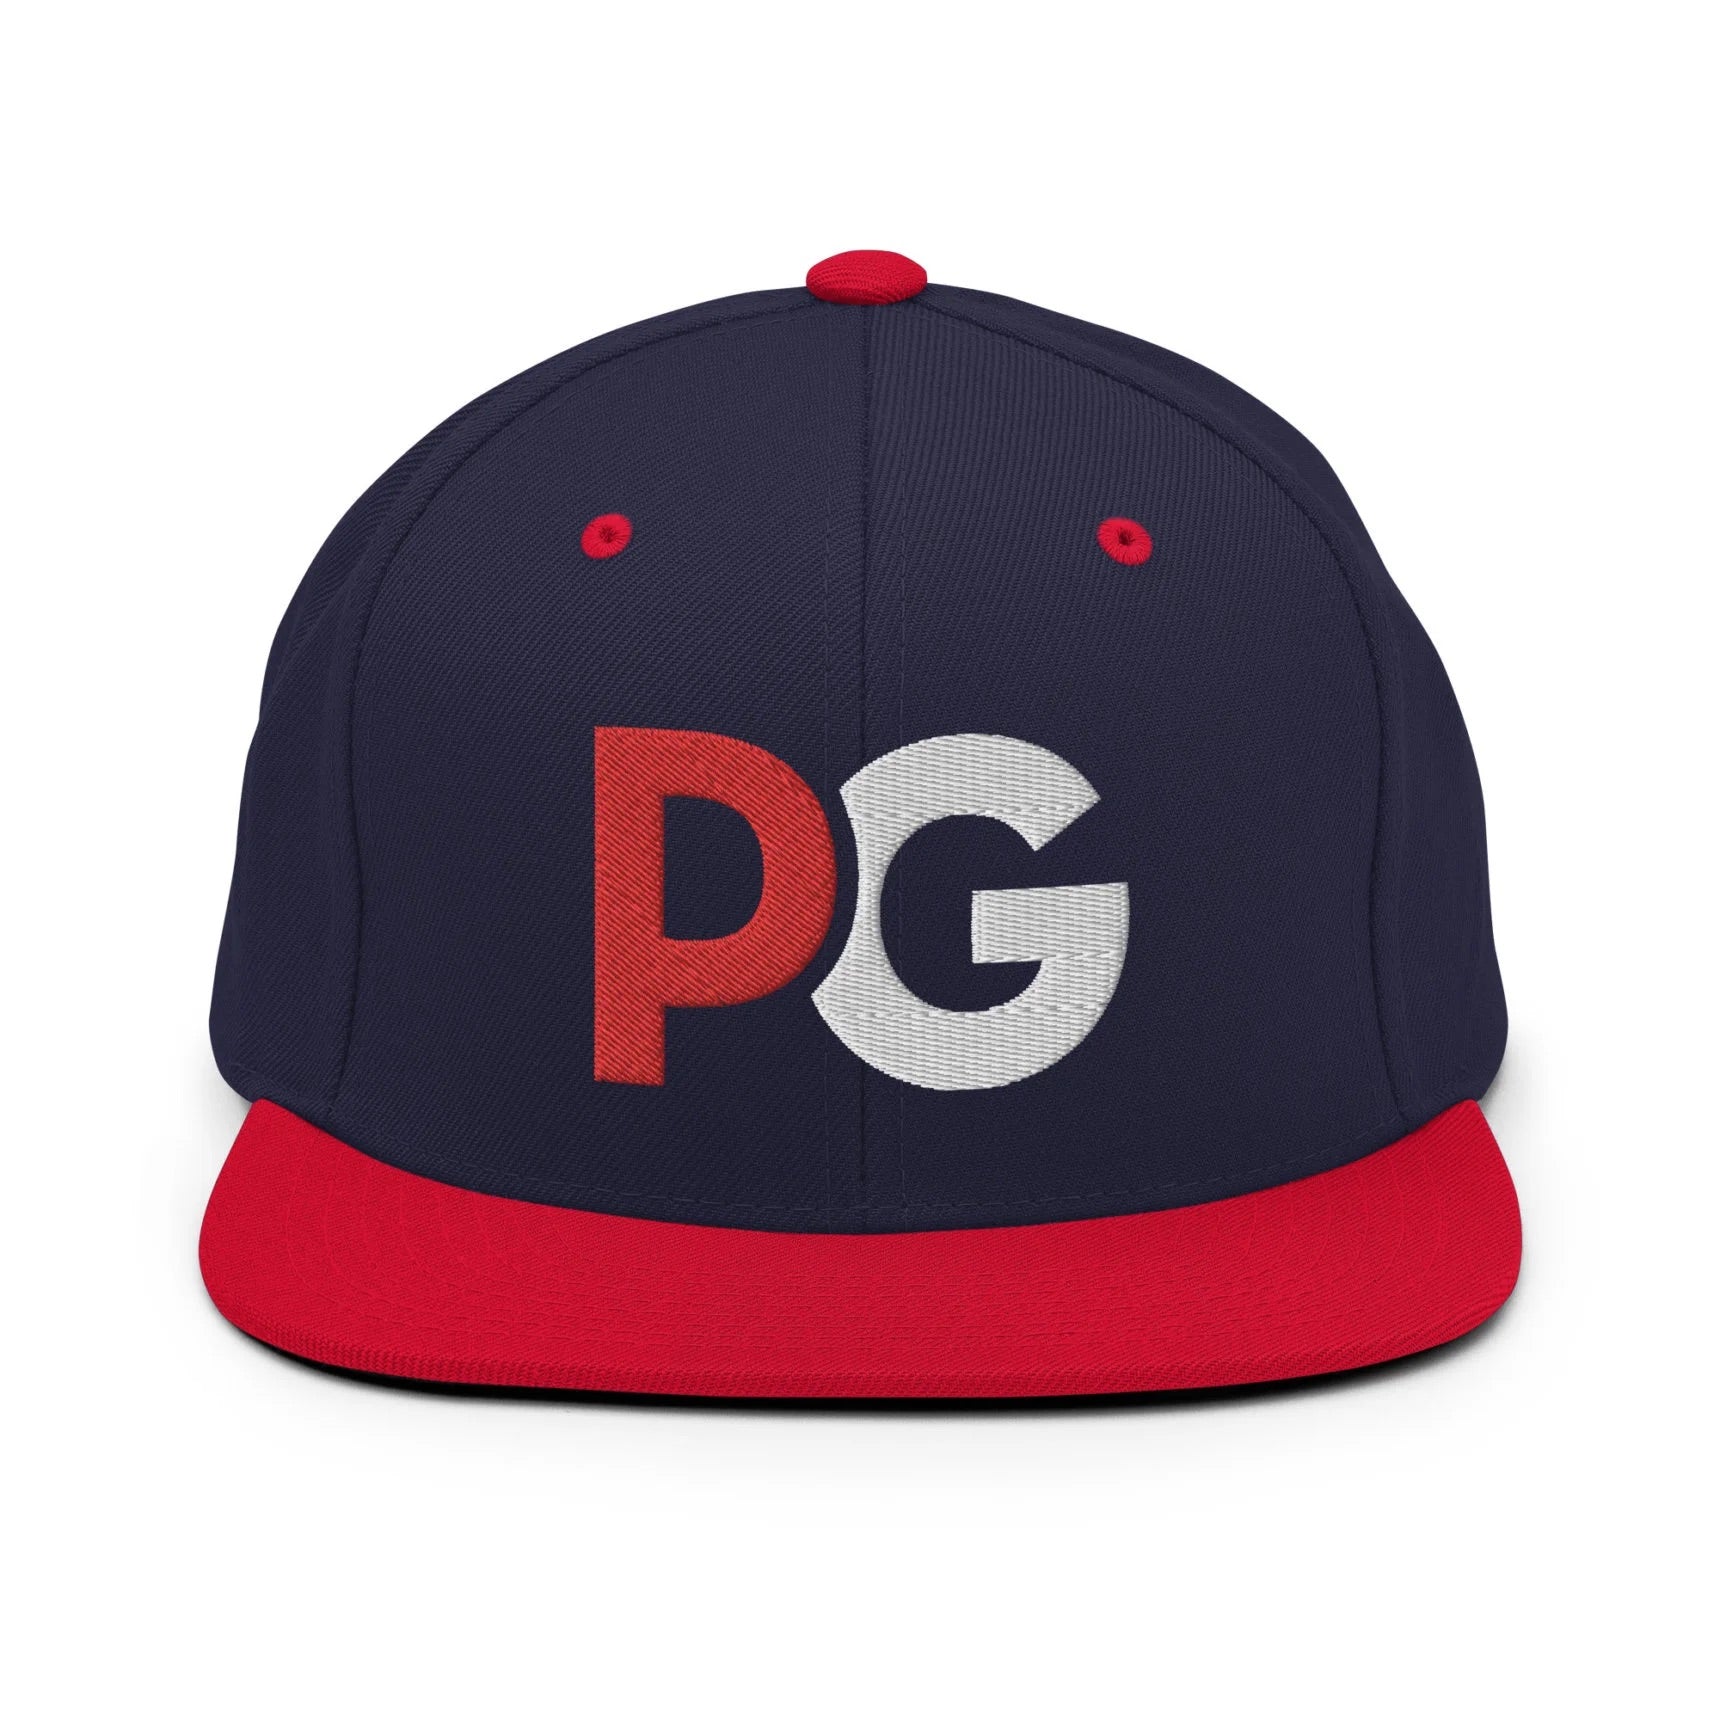 ProfesorGamingTV Snapback Hat by ShowZone in navy with red brim and accents